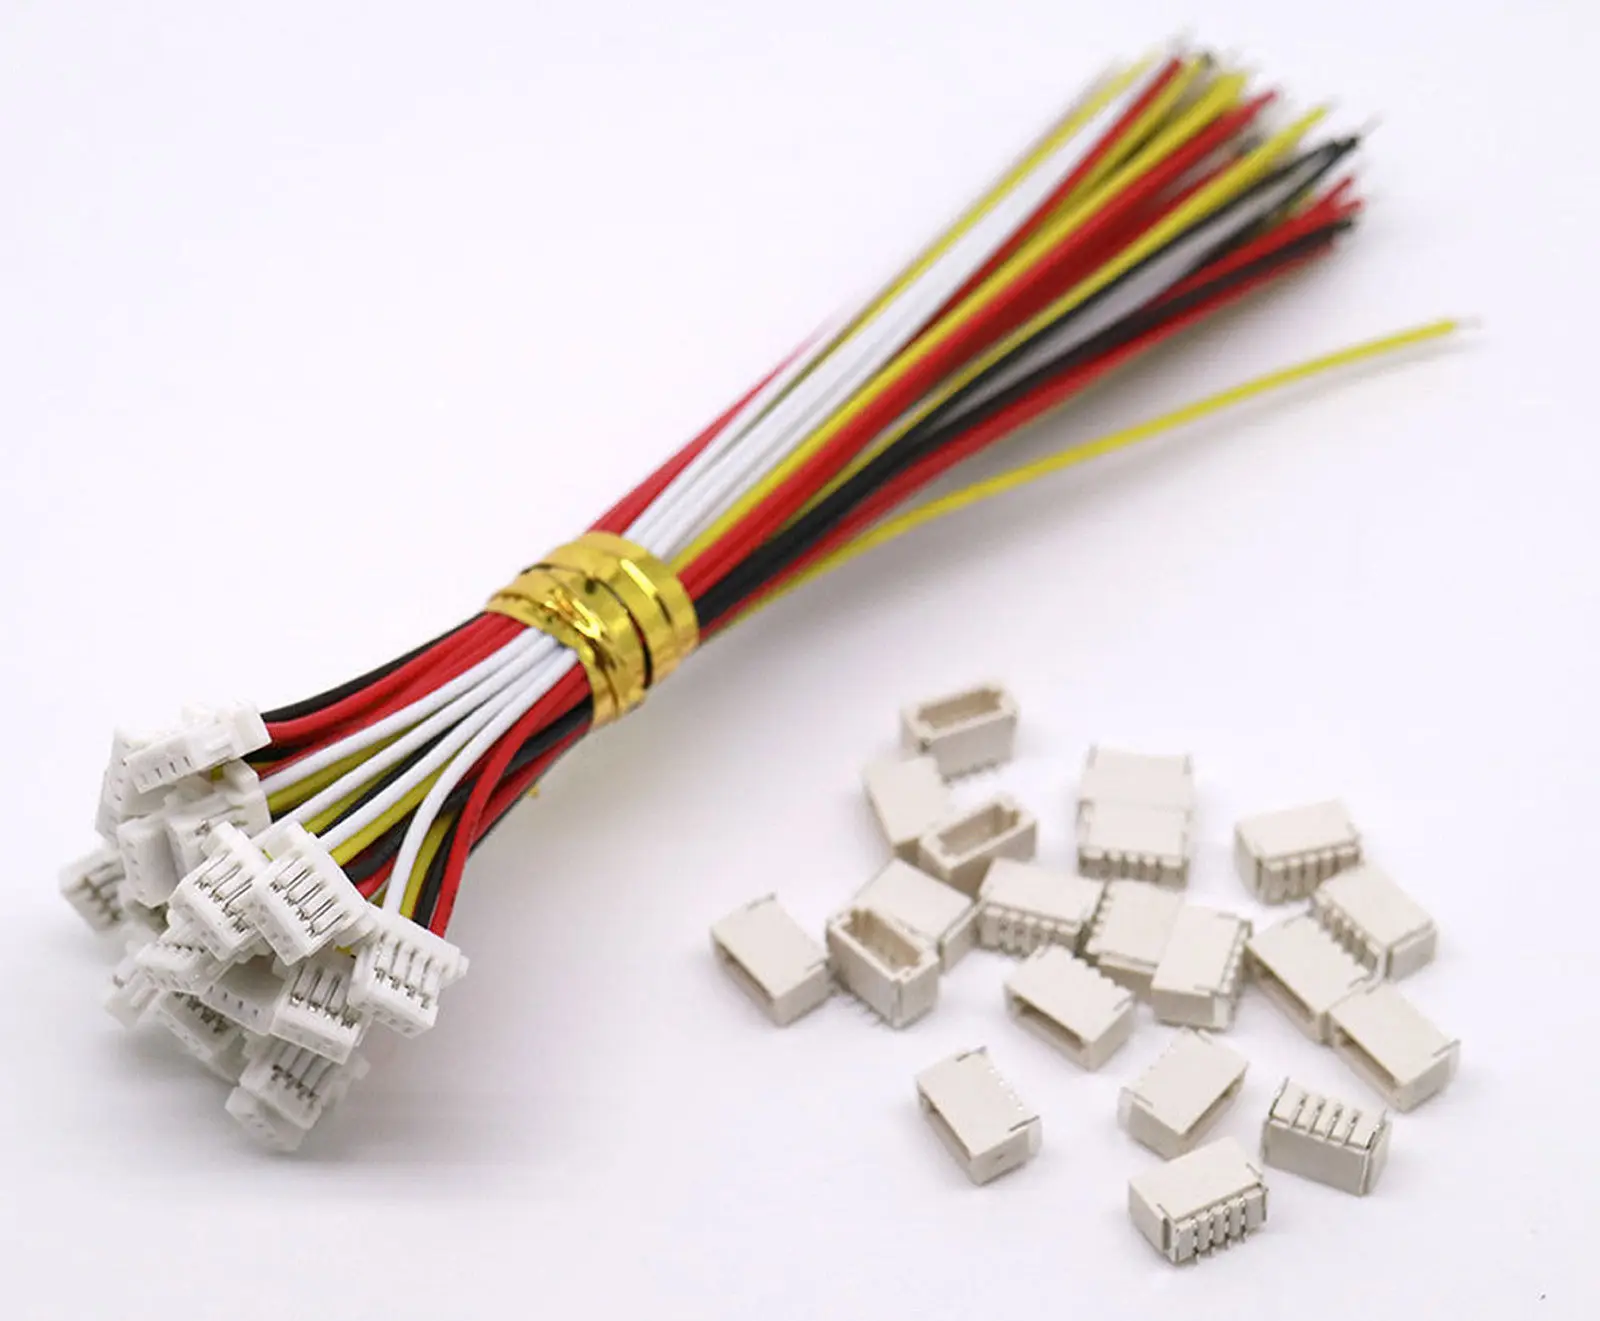 10sets Mini Micro JST 1.0mm SH 4-Pin Connector Plug With Wires Cables